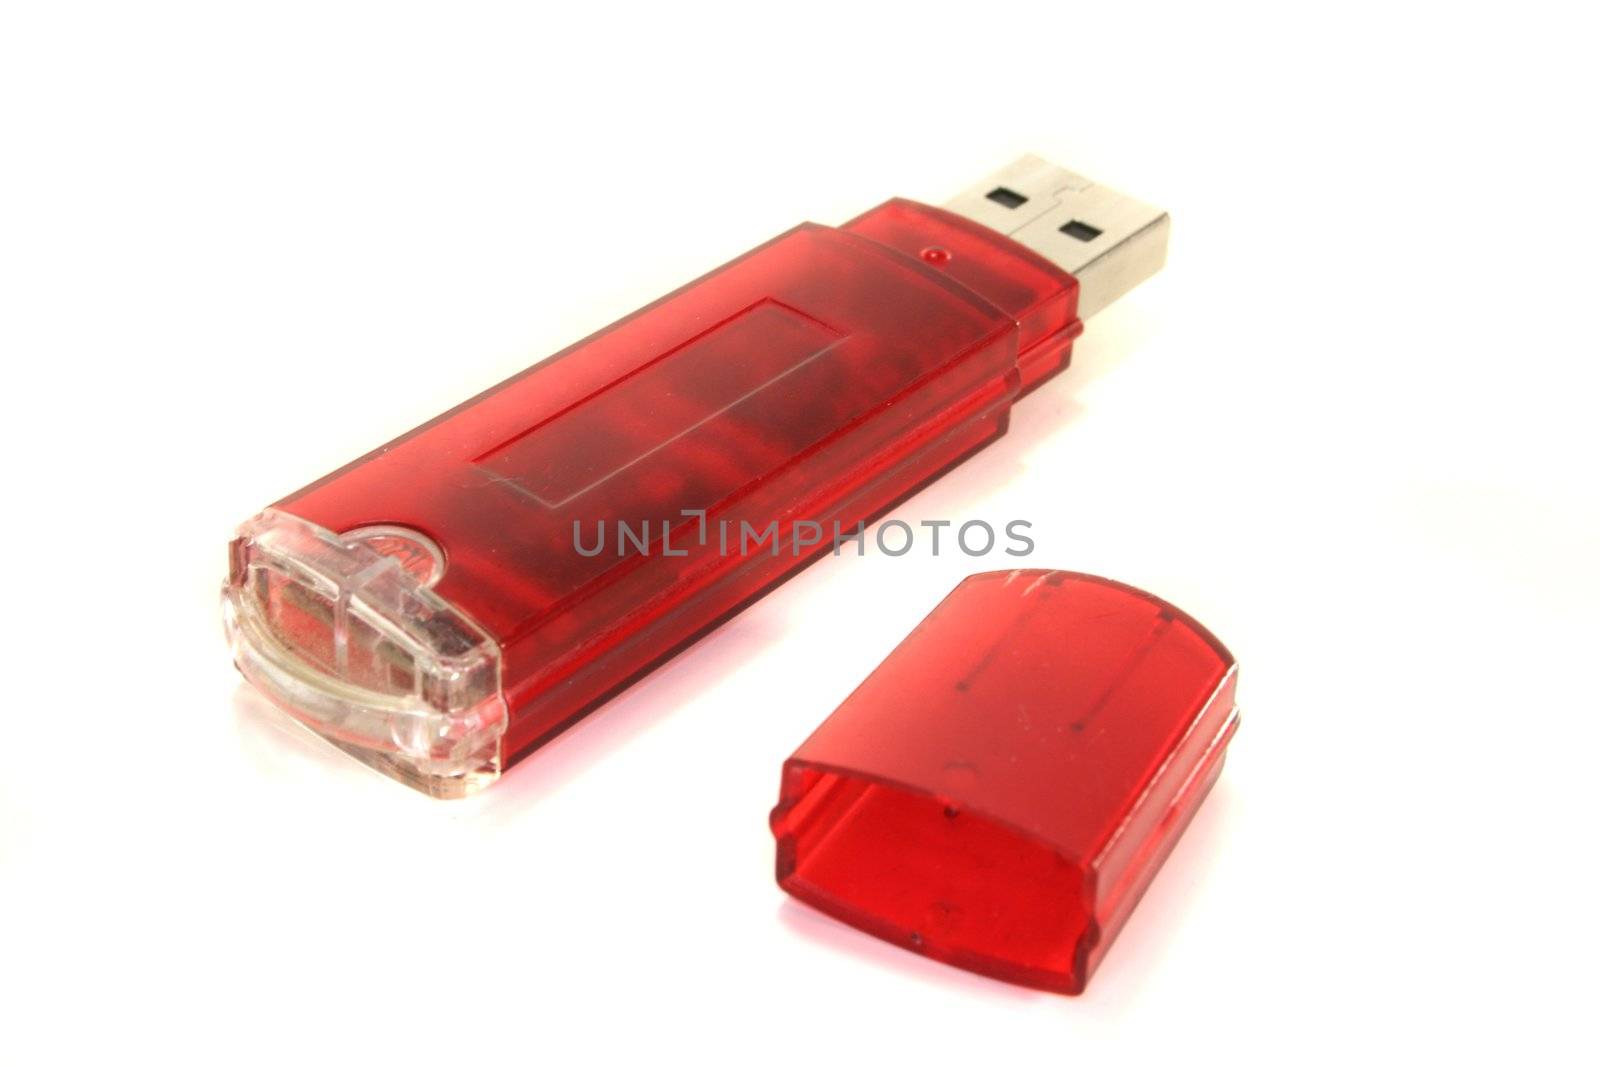 Usb Stick by discovery